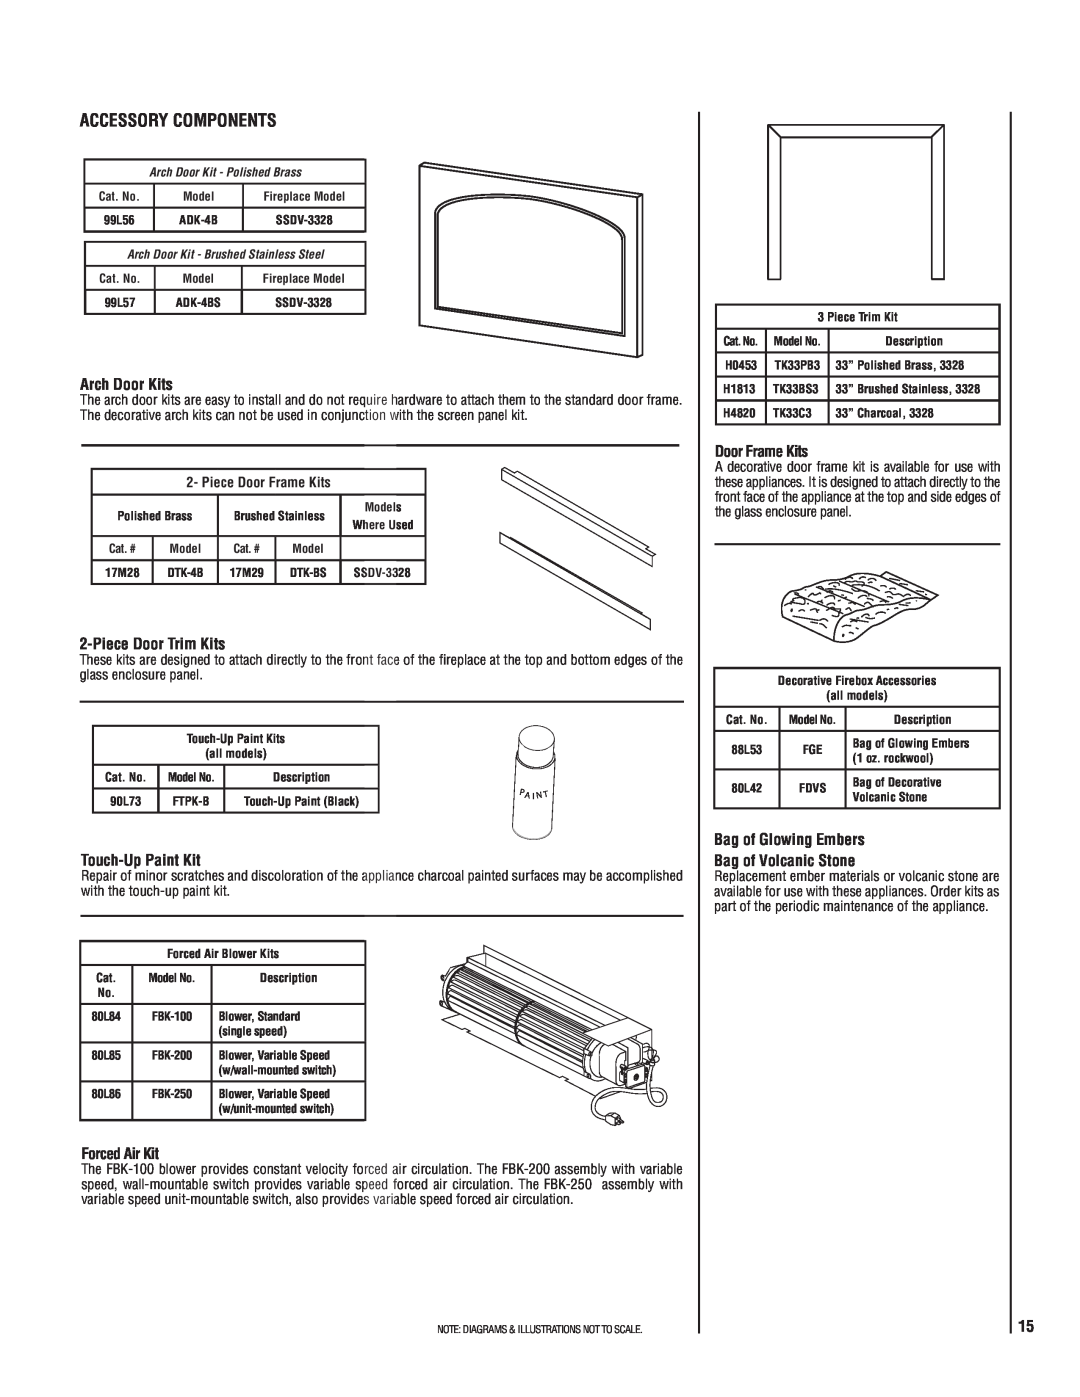 Superior SSDVT-3328CNM manual Arch Door Kits, PieceDoor Trim Kits, Touch-UpPaint Kit, Forced Air Kit, Door Frame Kits 